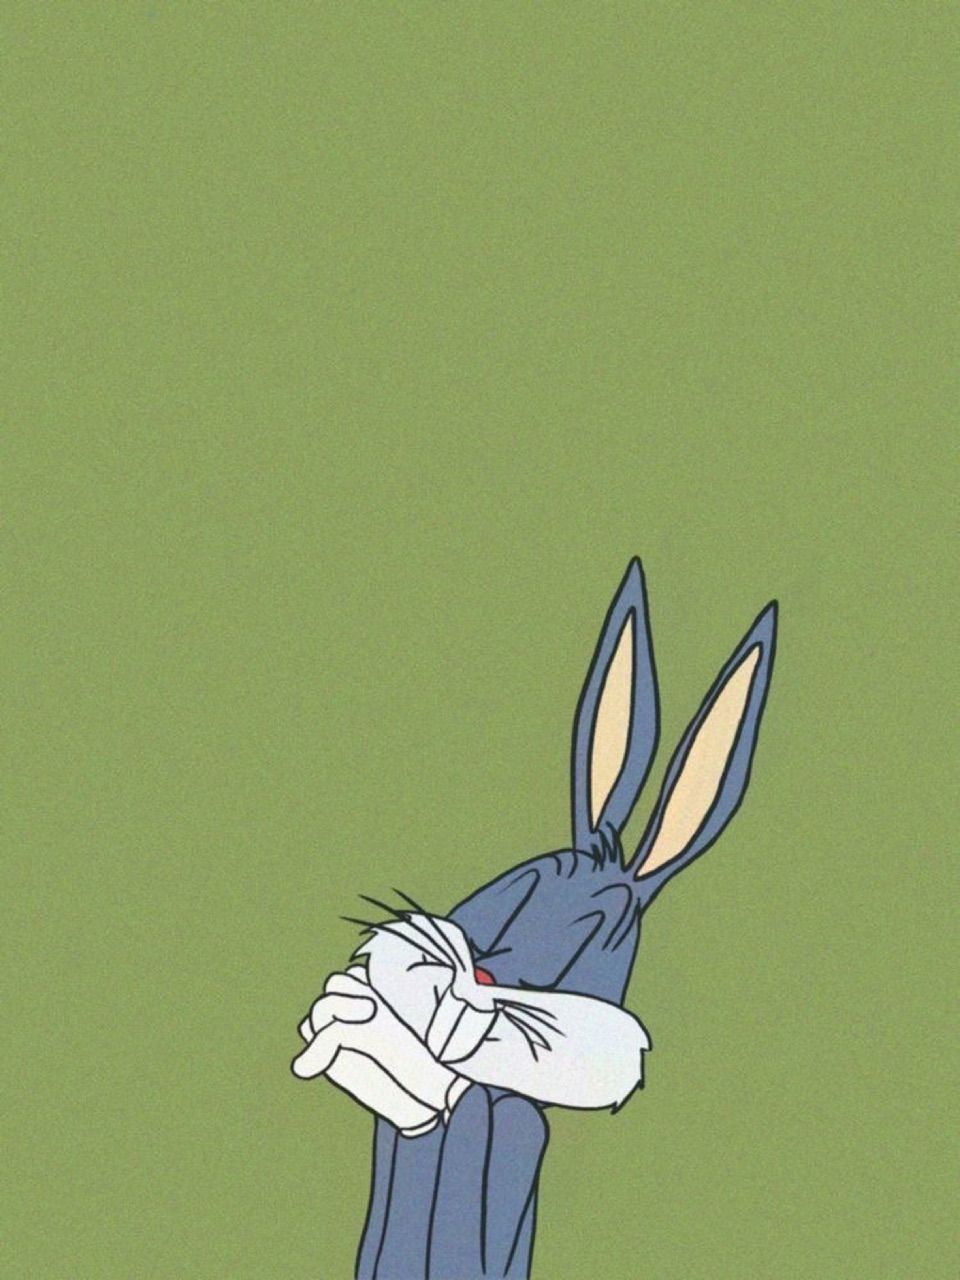 Bugs bunny iPhone wallpaper. Tap to see more cute iPhone wallpaper, tech, and pop culture posts! - Bugs Bunny